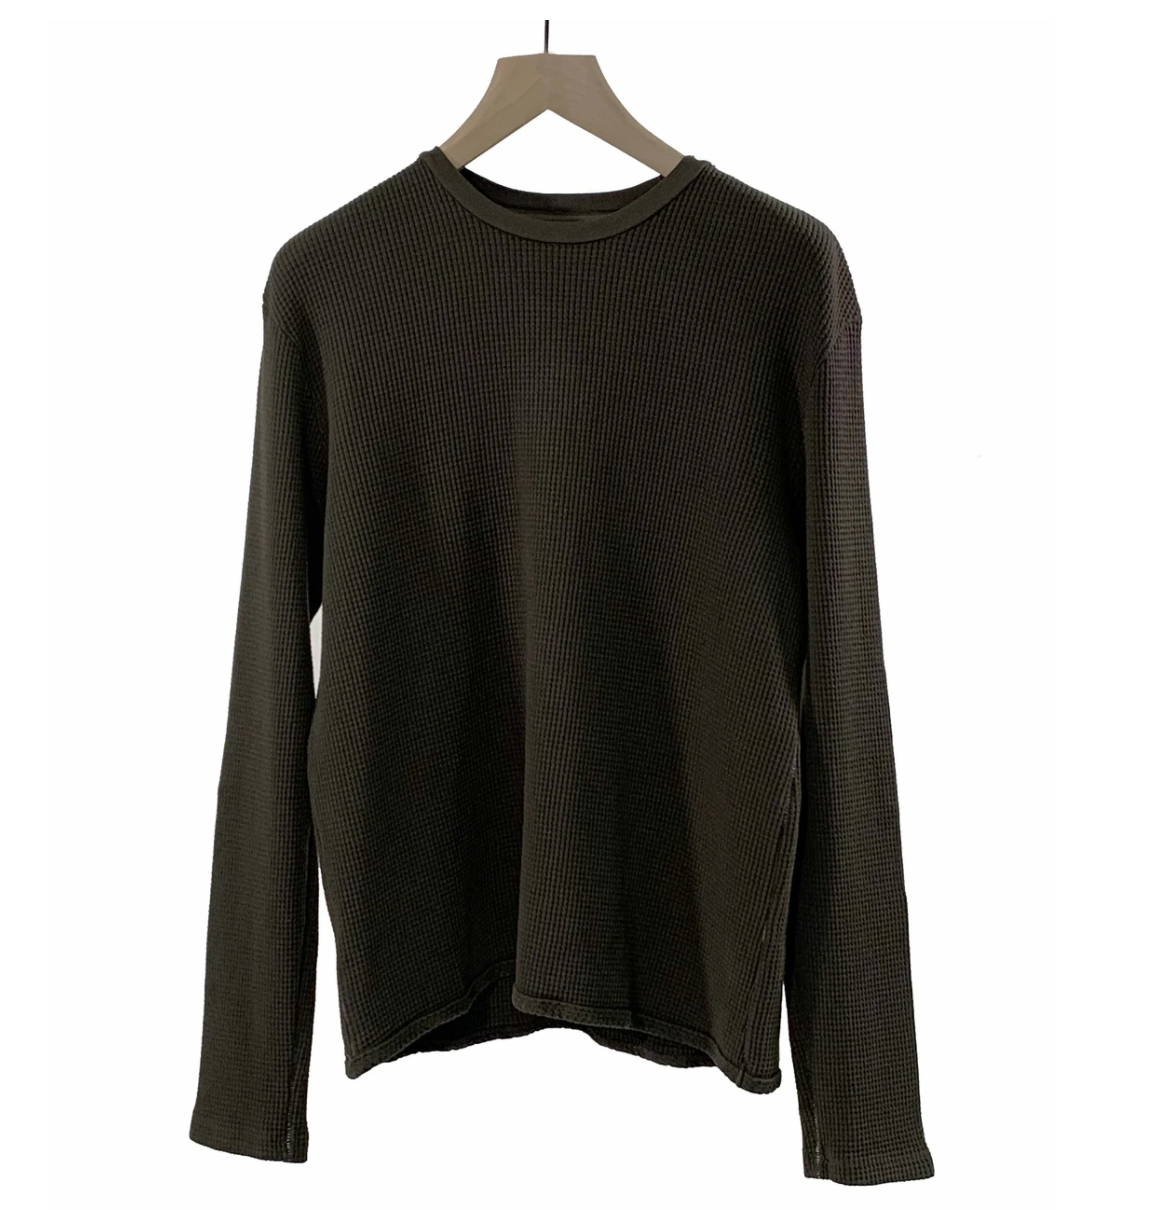 Thermal  Long Sleeve T-Shirt  (Army)